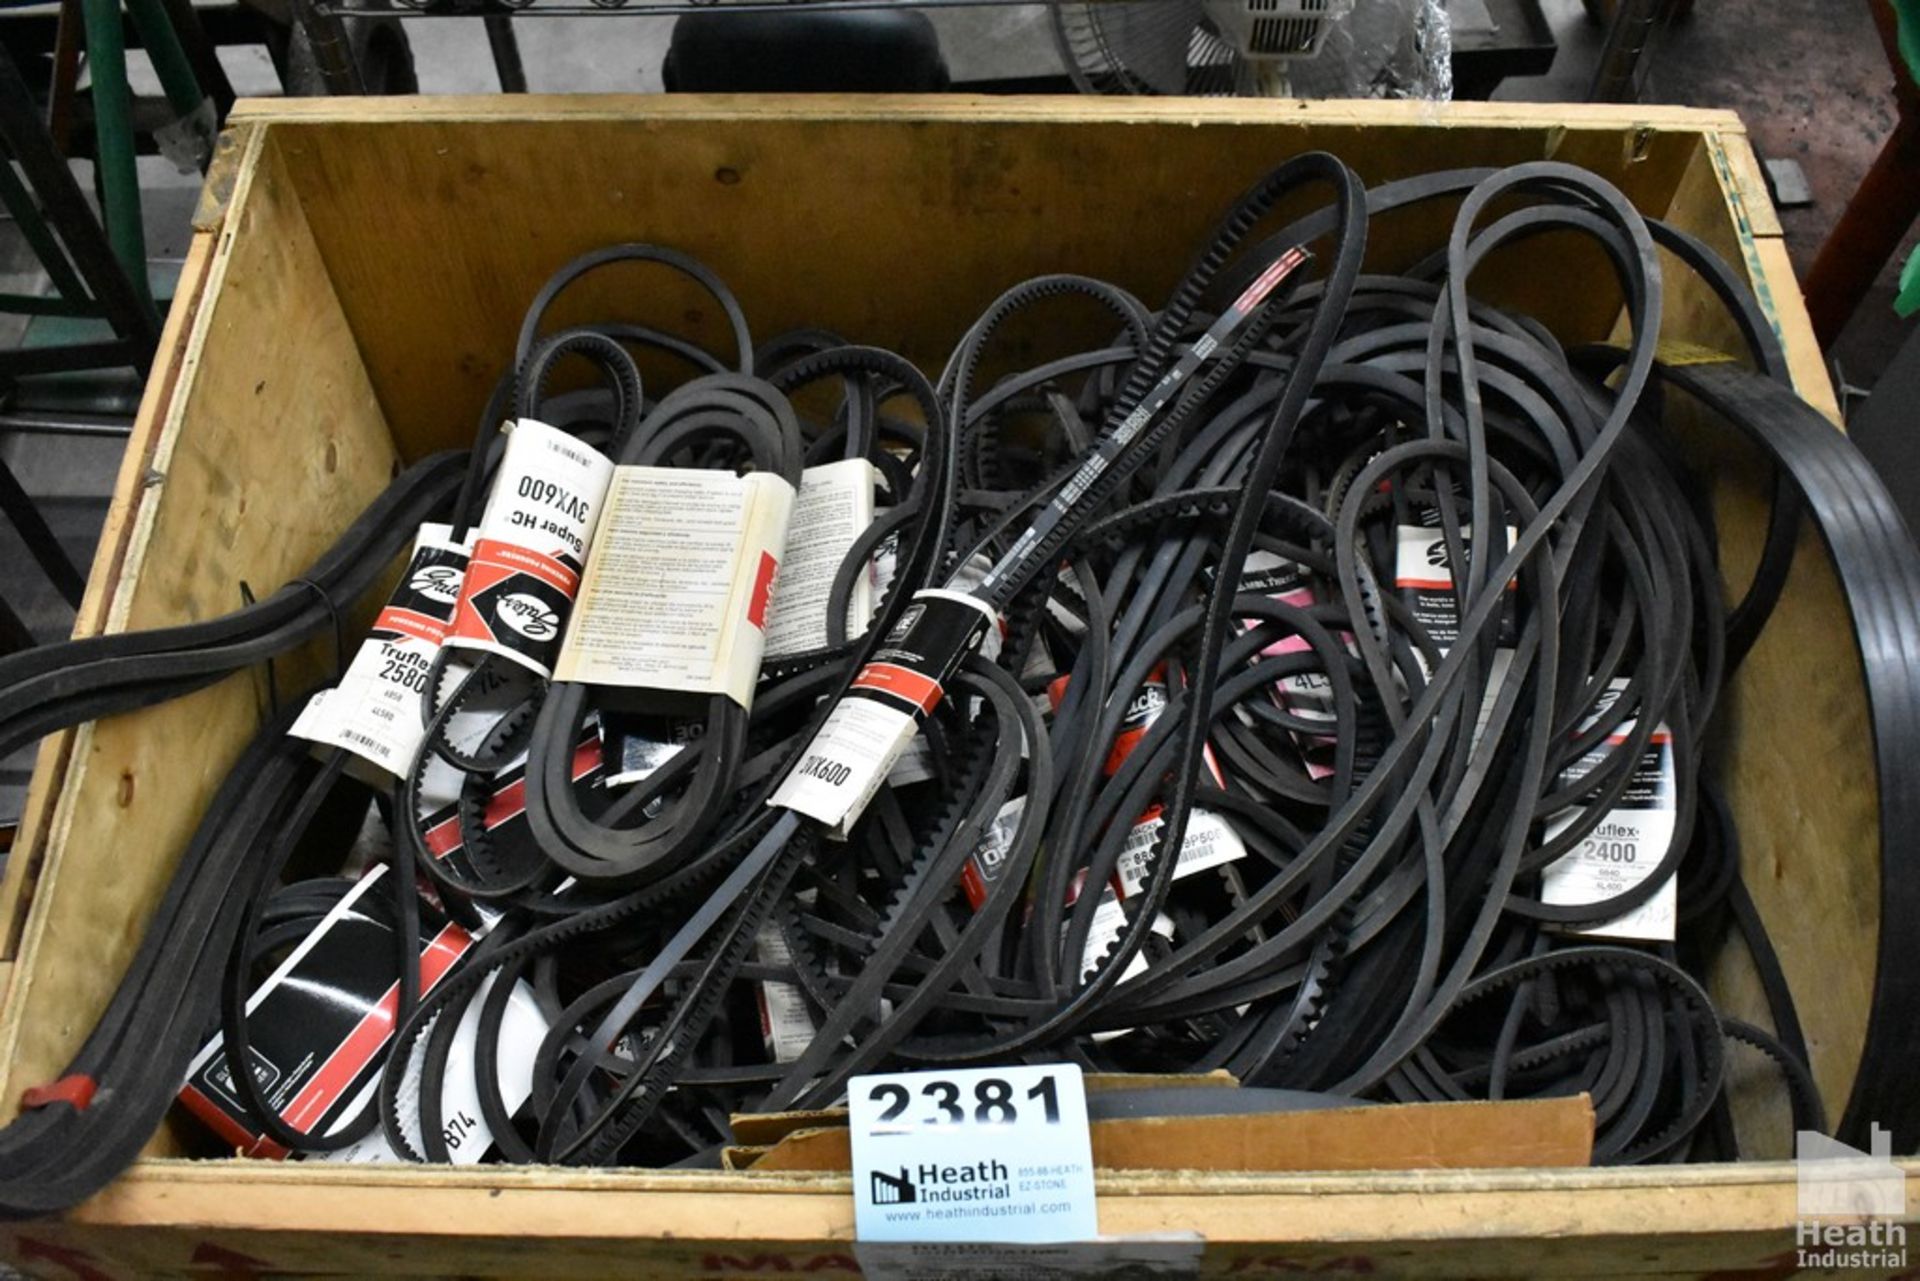 LARGE QUANTITY OF FAN BELTS IN CRATE - Image 2 of 3